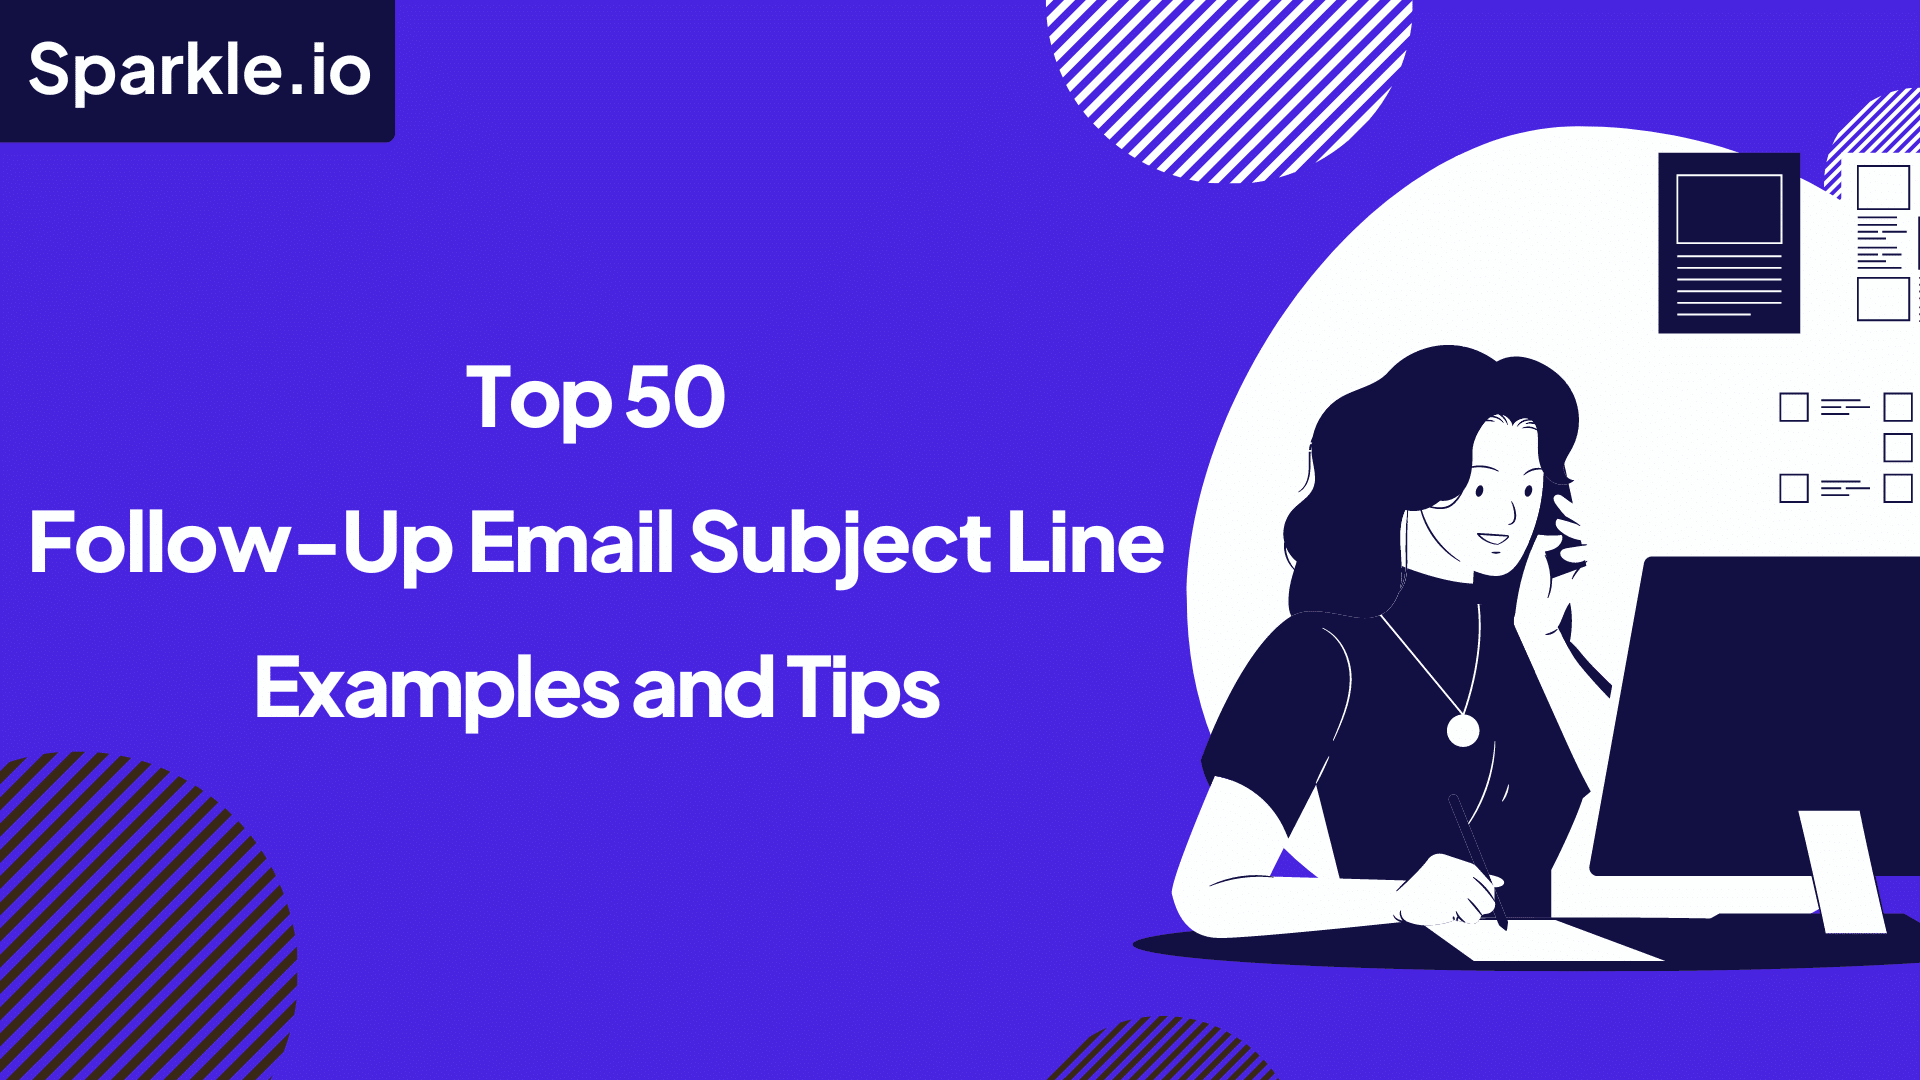 Top 50 Follow-Up Email Subject Line Examples and Tips